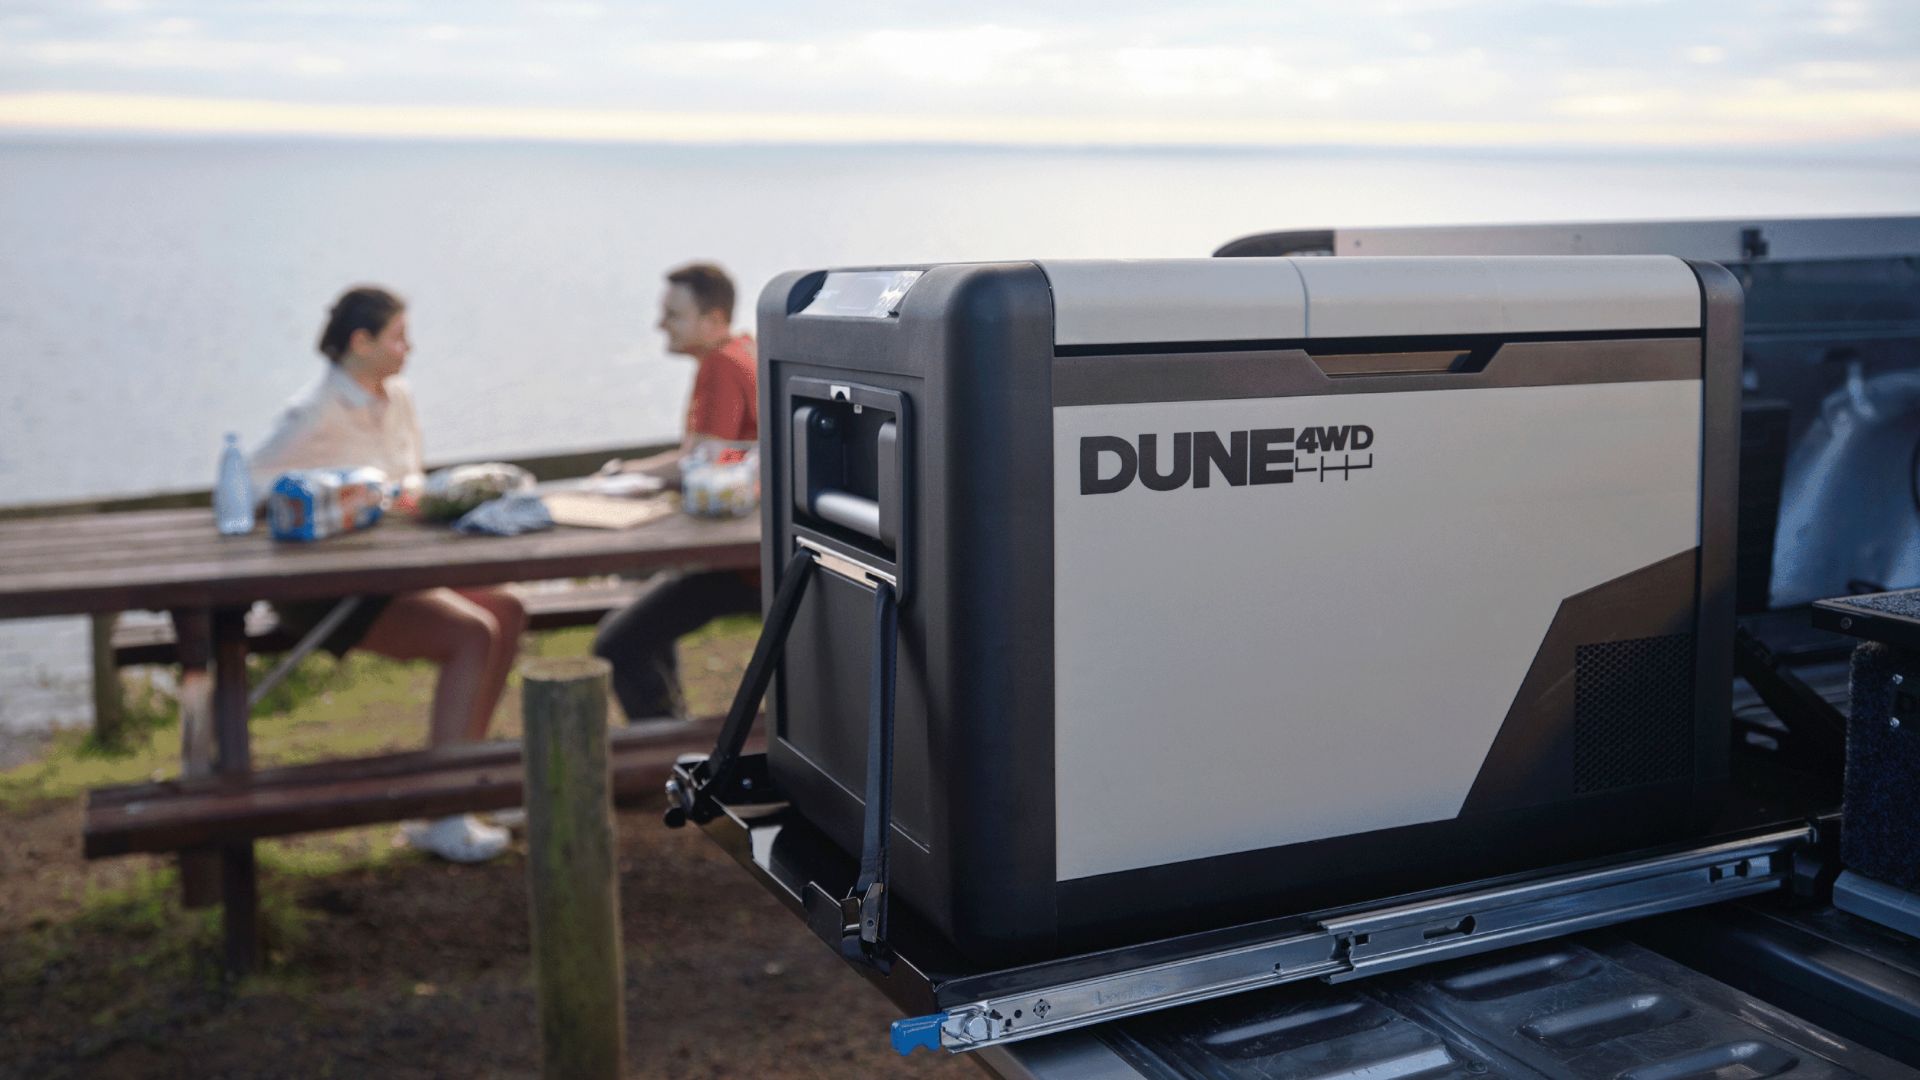 5 Main Features & Why You’ll Love The Dune 4WD Fridge Range